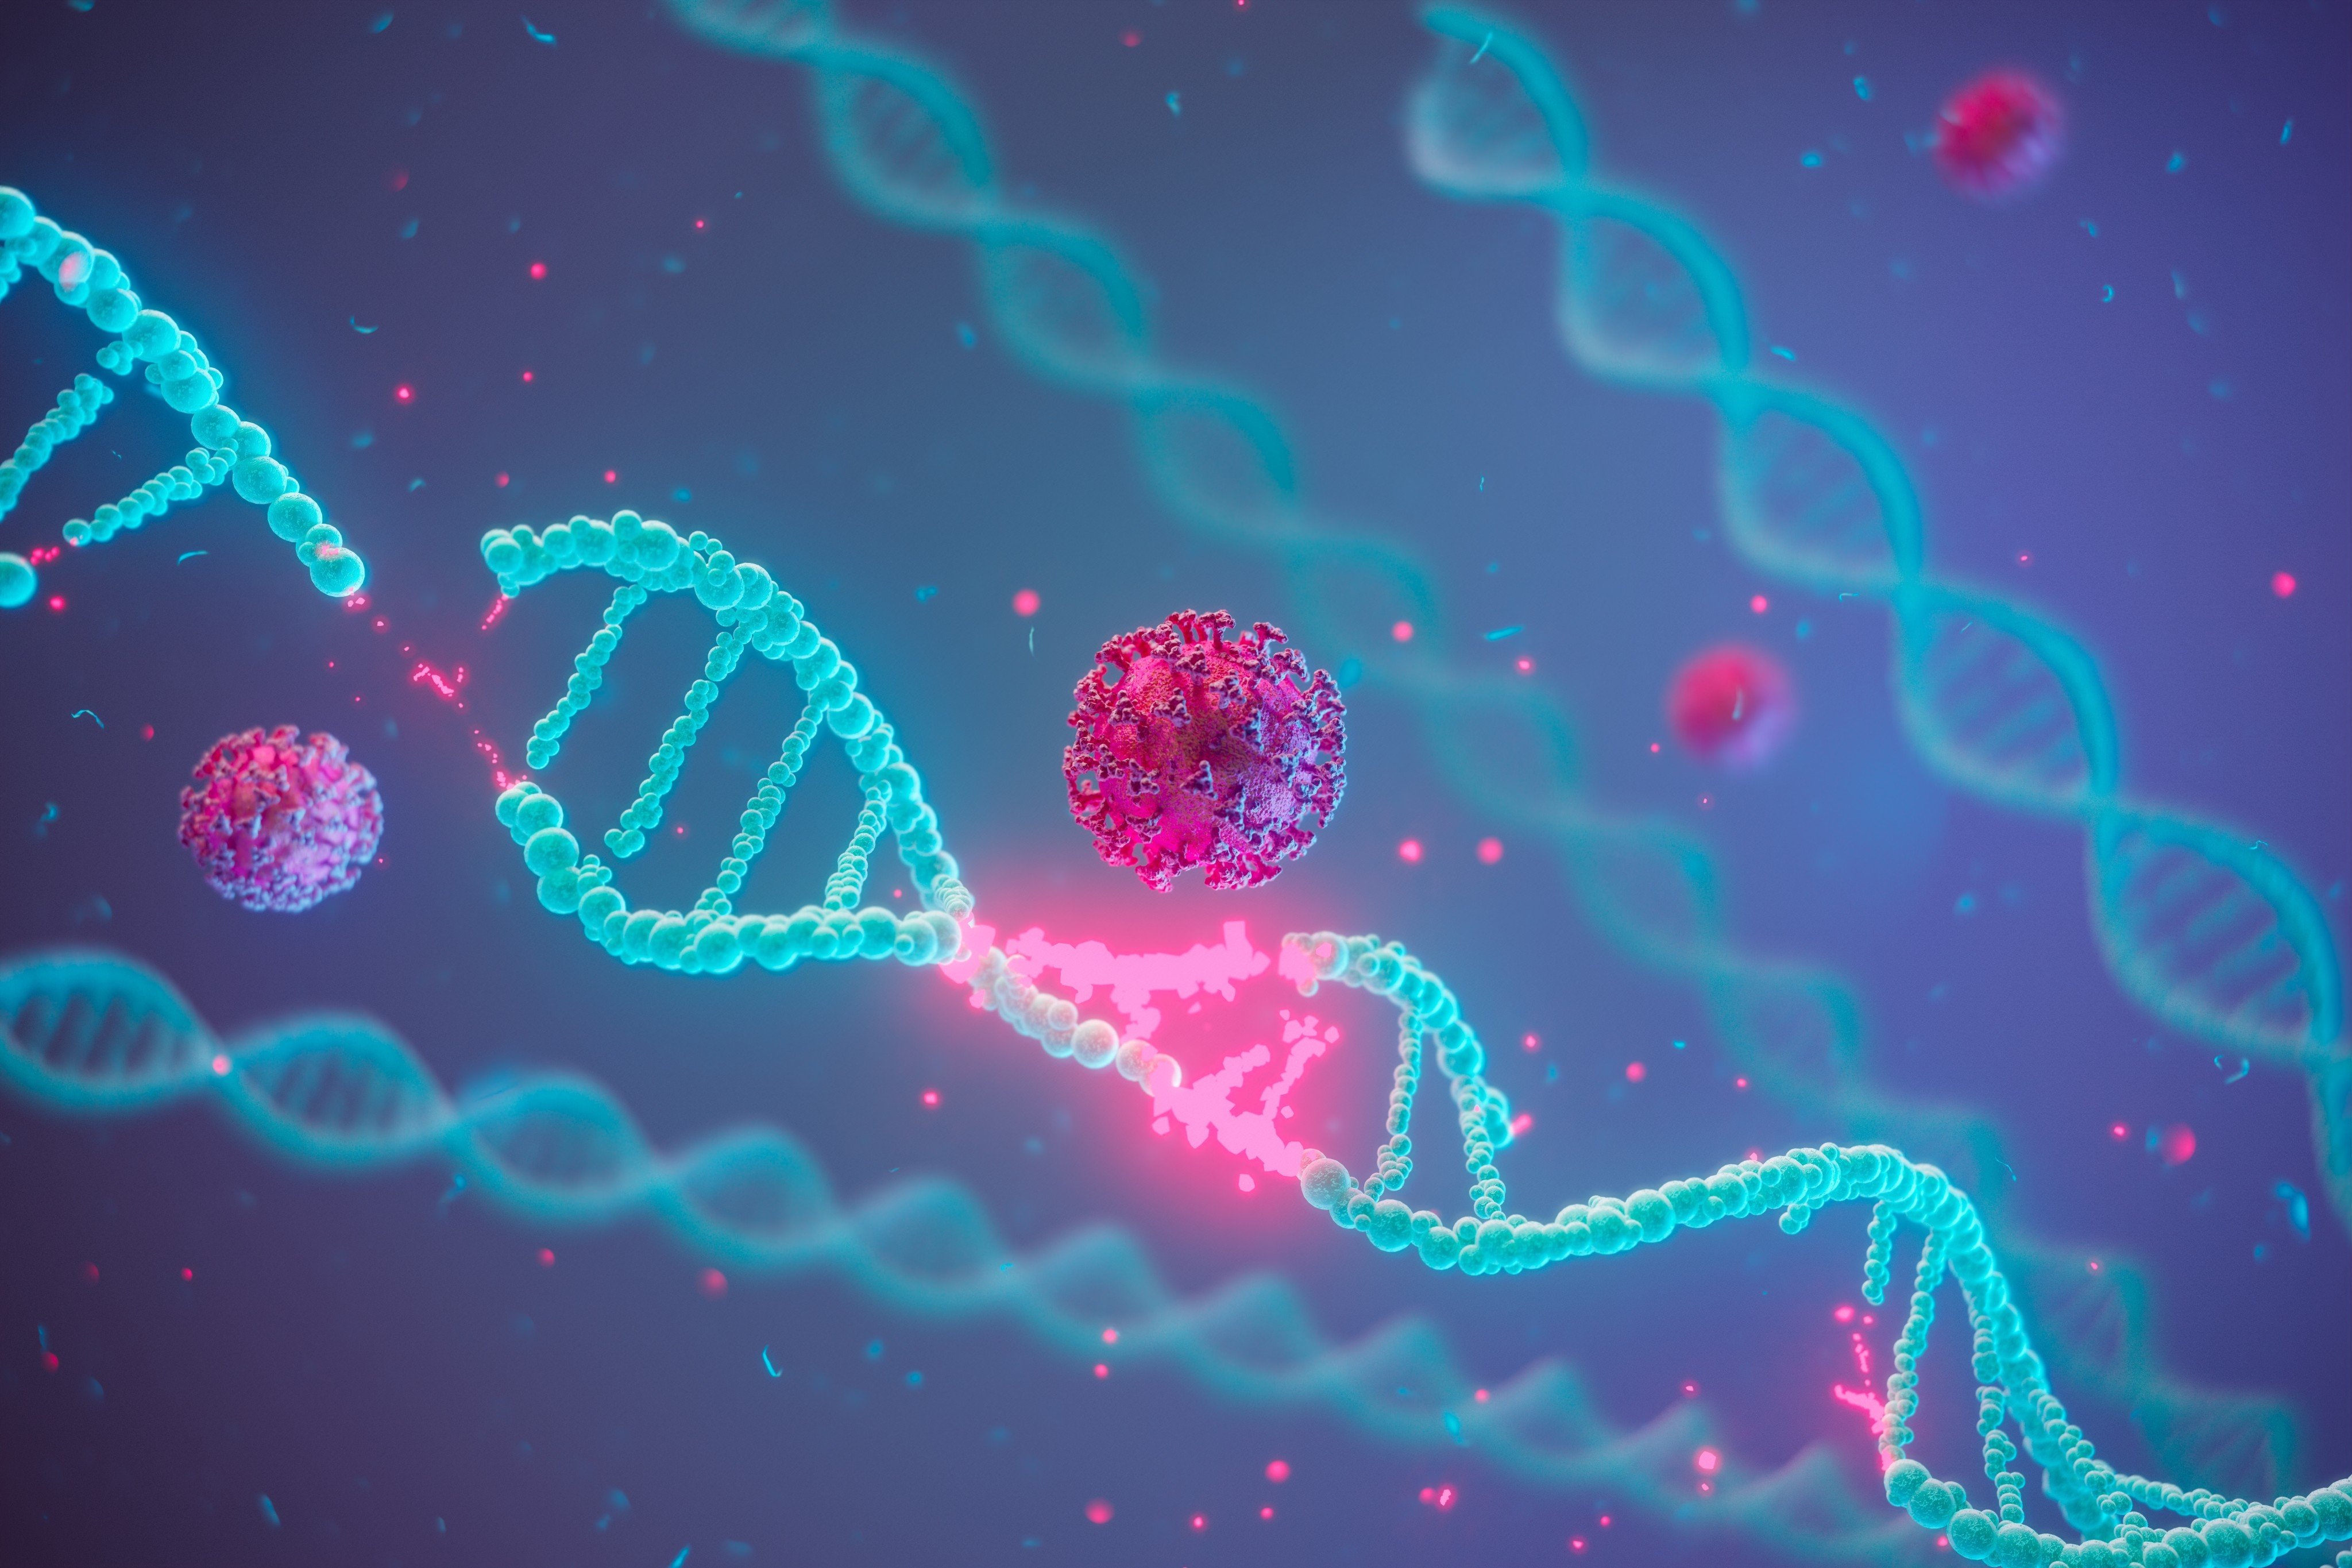 Chinese researchers say a new CRISPR-based gene editing system has opened new possibilities in plant engineering and disease treatment. Photo: Shutterstock